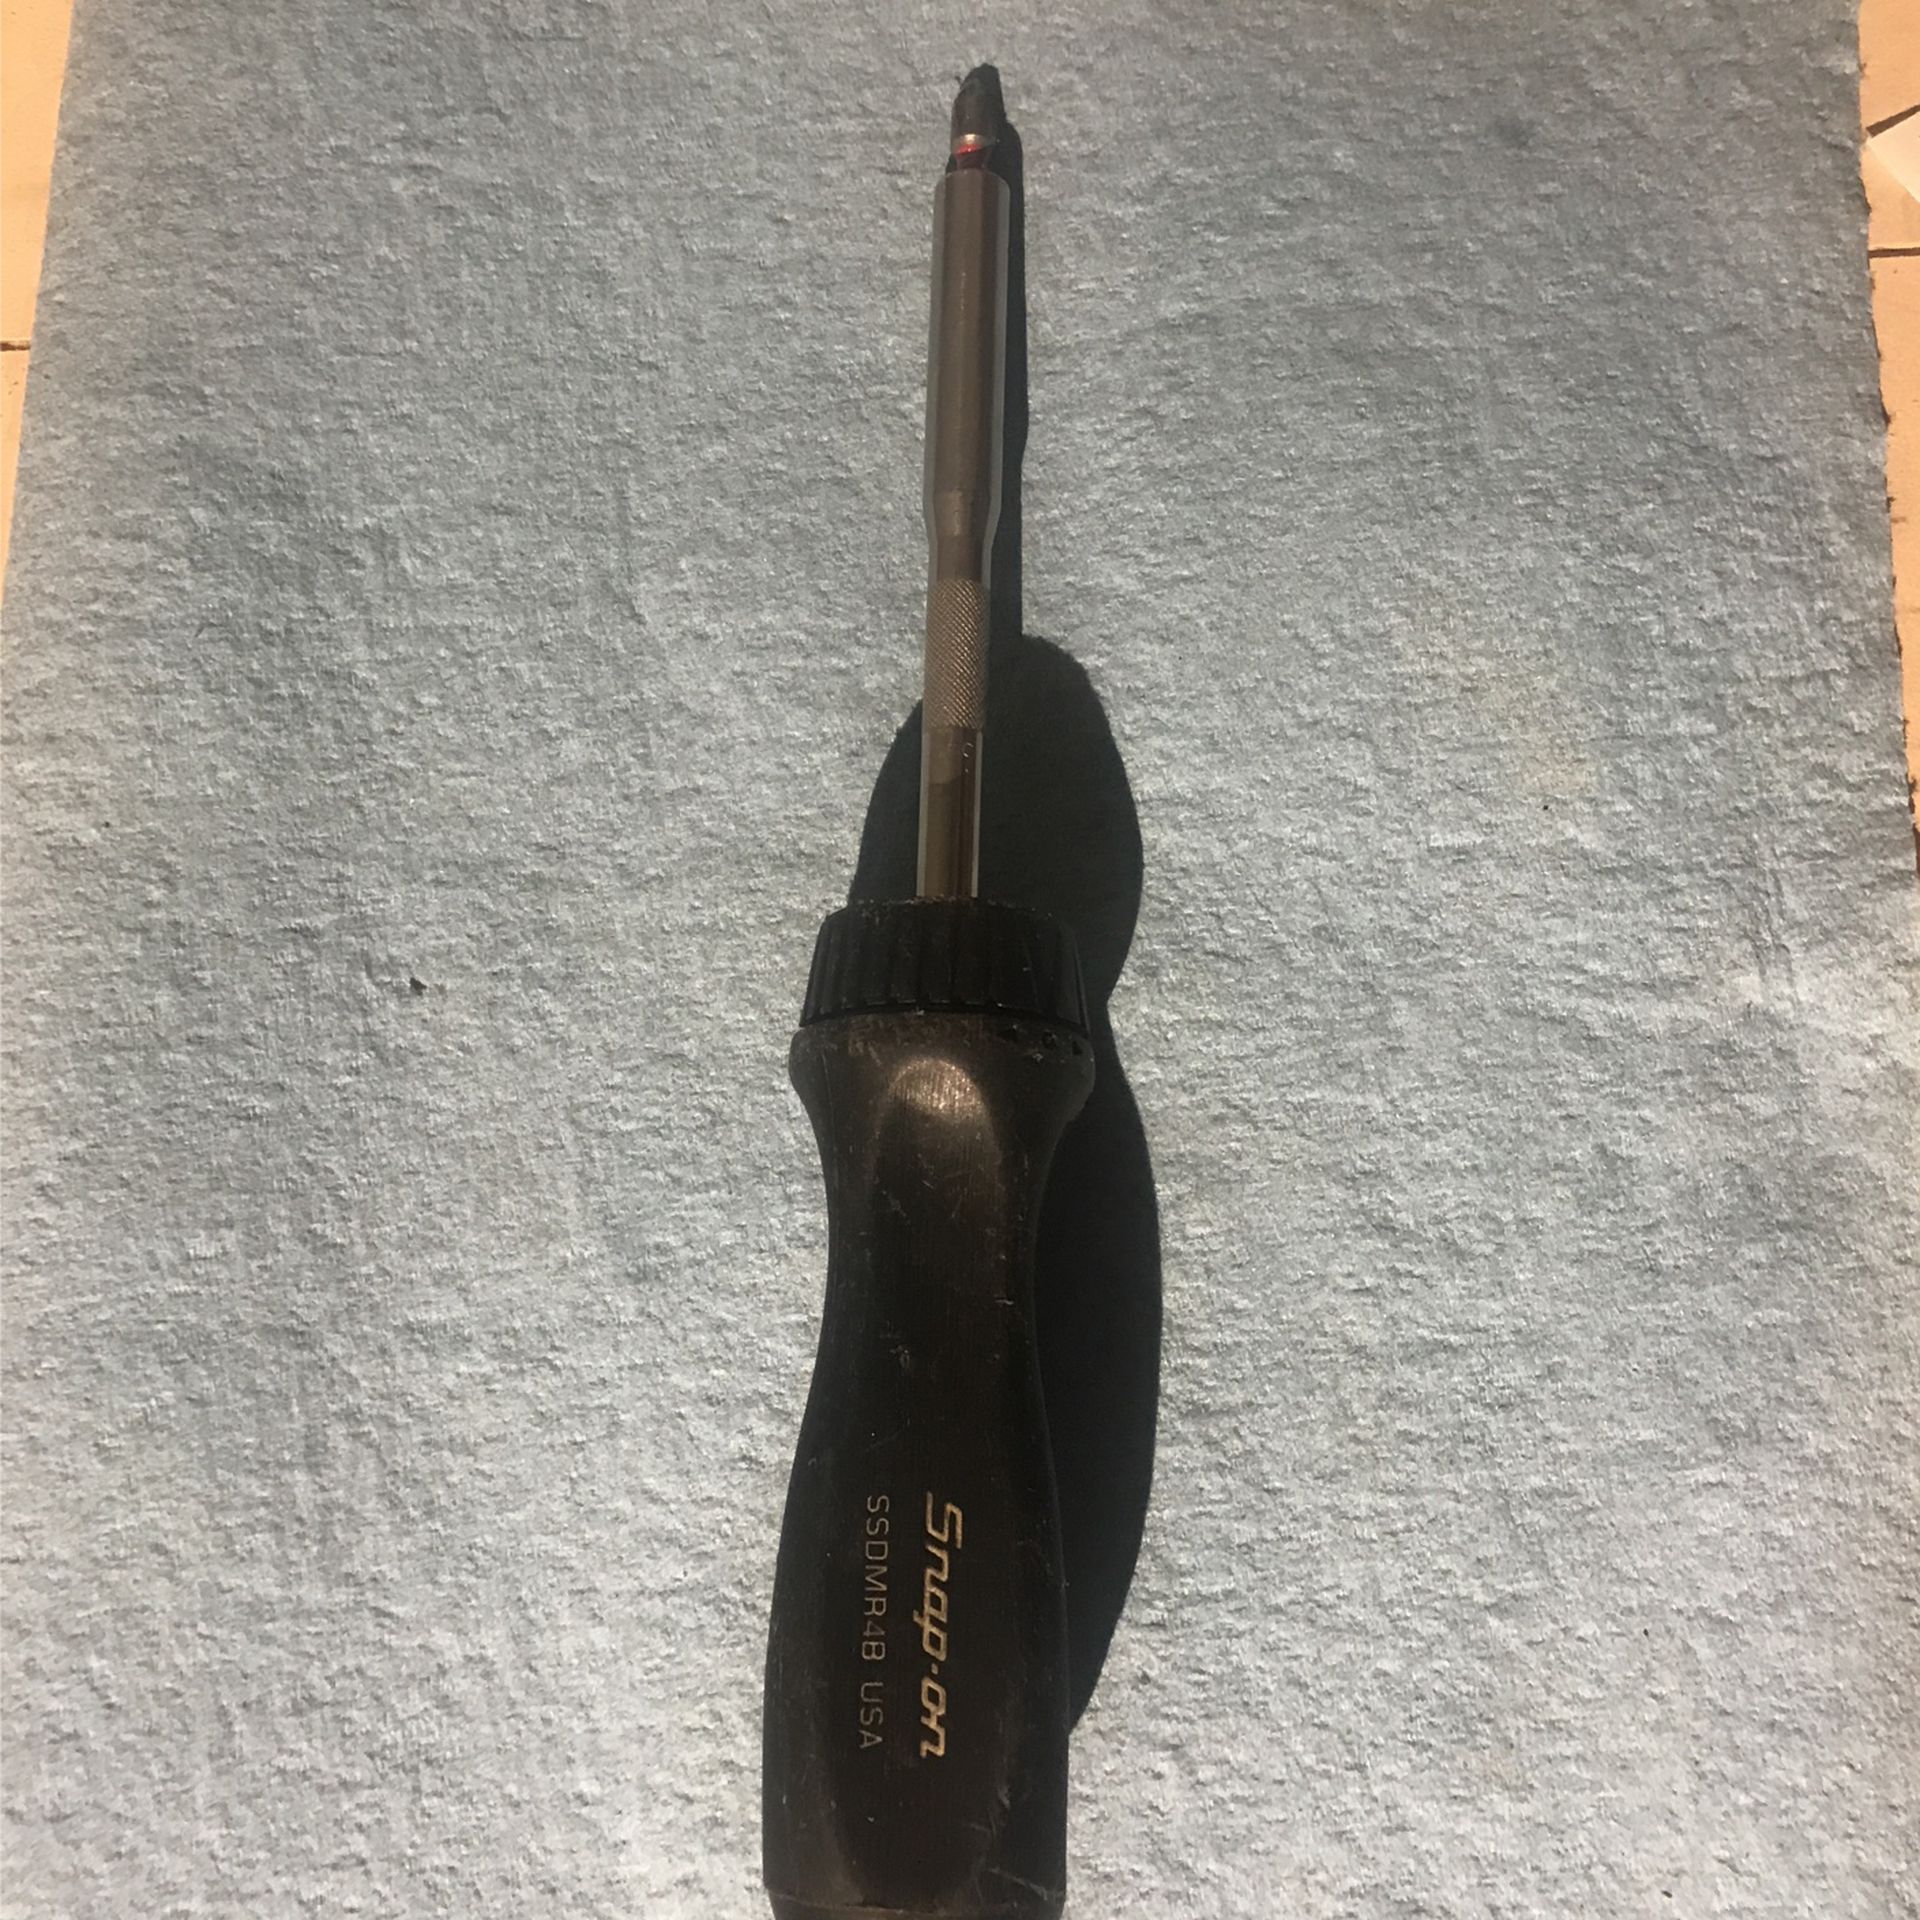 Snap-on Ratcheting Screwdriver 